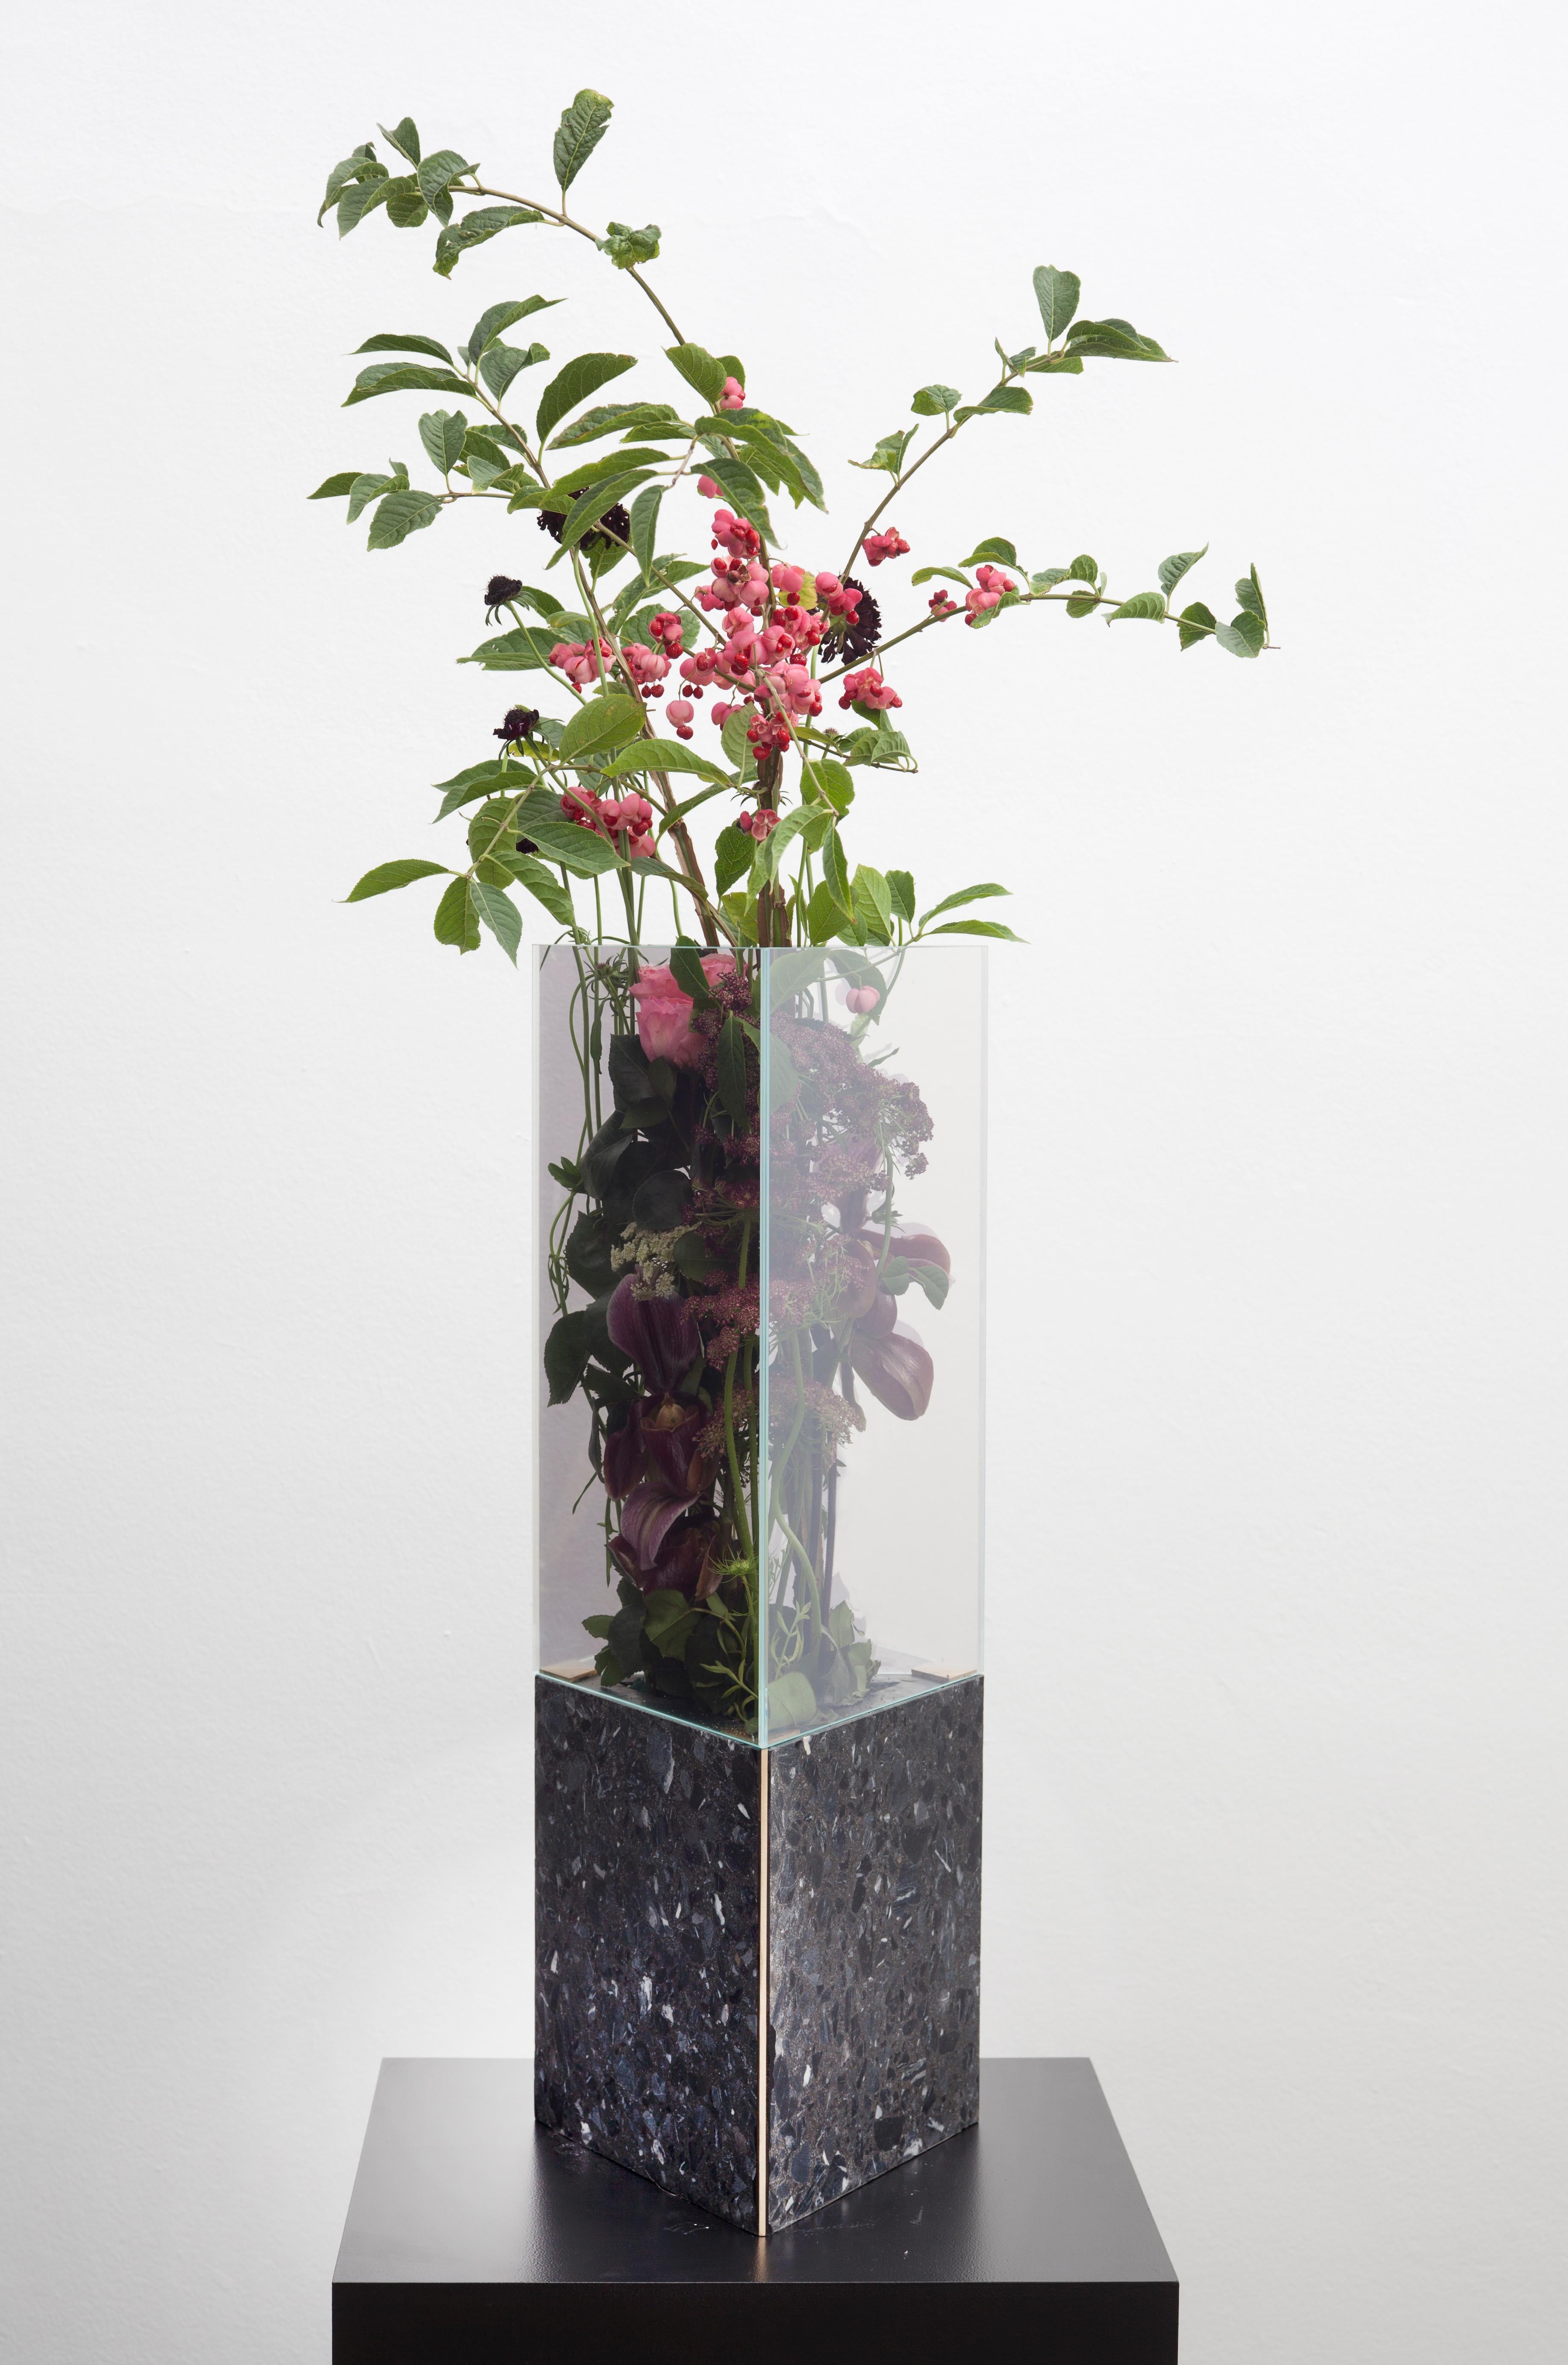 Black Terrazo Triangular Narcissus vase by Tino Seubert
Dimensions: D 20.8 x W 24 x H 62.8 cm.
Materials: Black terrazzo, brass, mirrored glass.

Tino Seubert
When he first made his now signature wicker and aluminium stools and benches in 2018